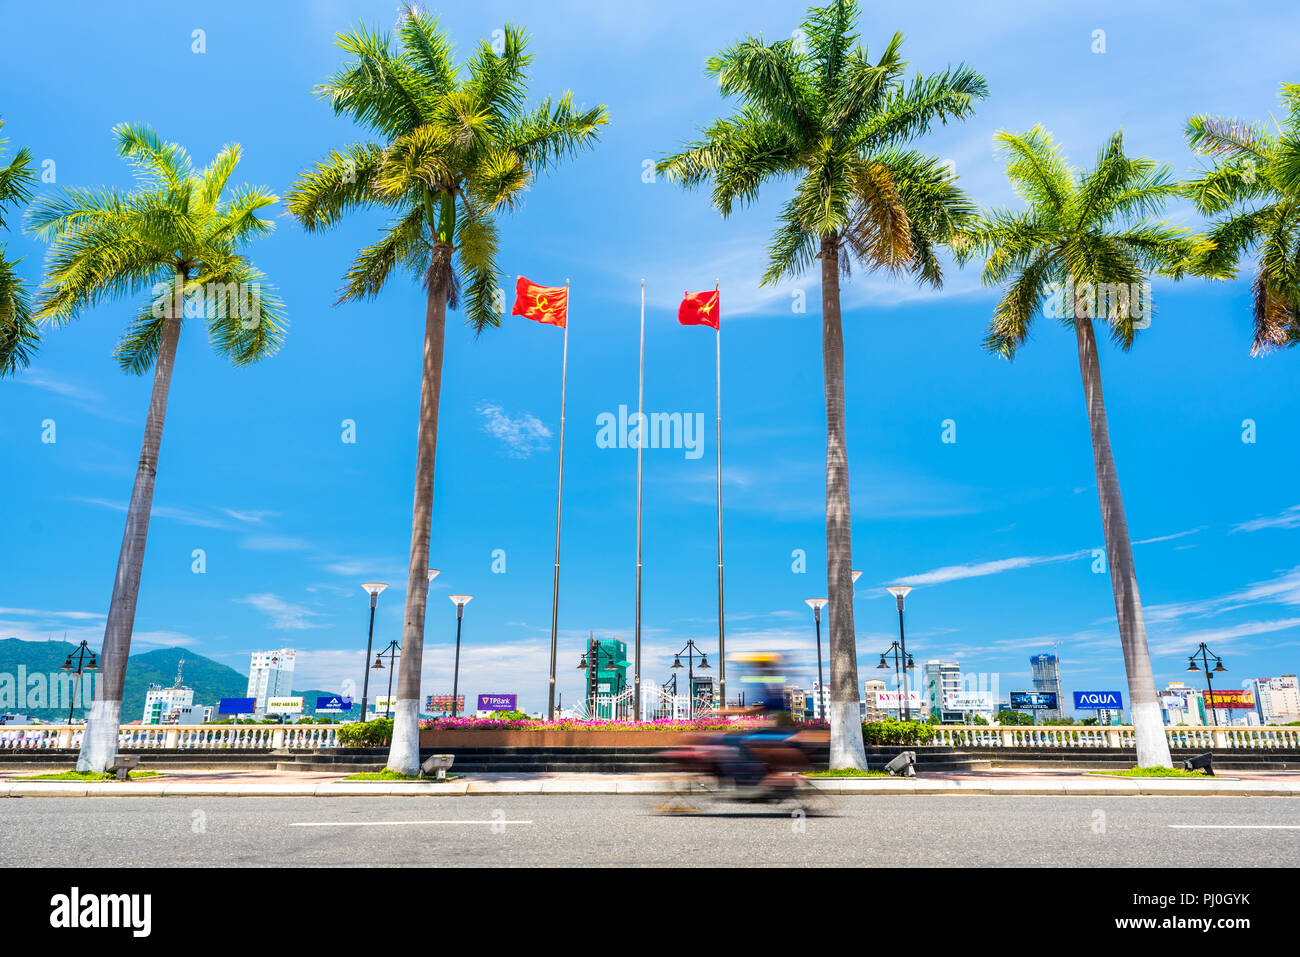 This is Vietnam: palm trees, azure sky, frantic motorbikes and red flags. Stock Photo